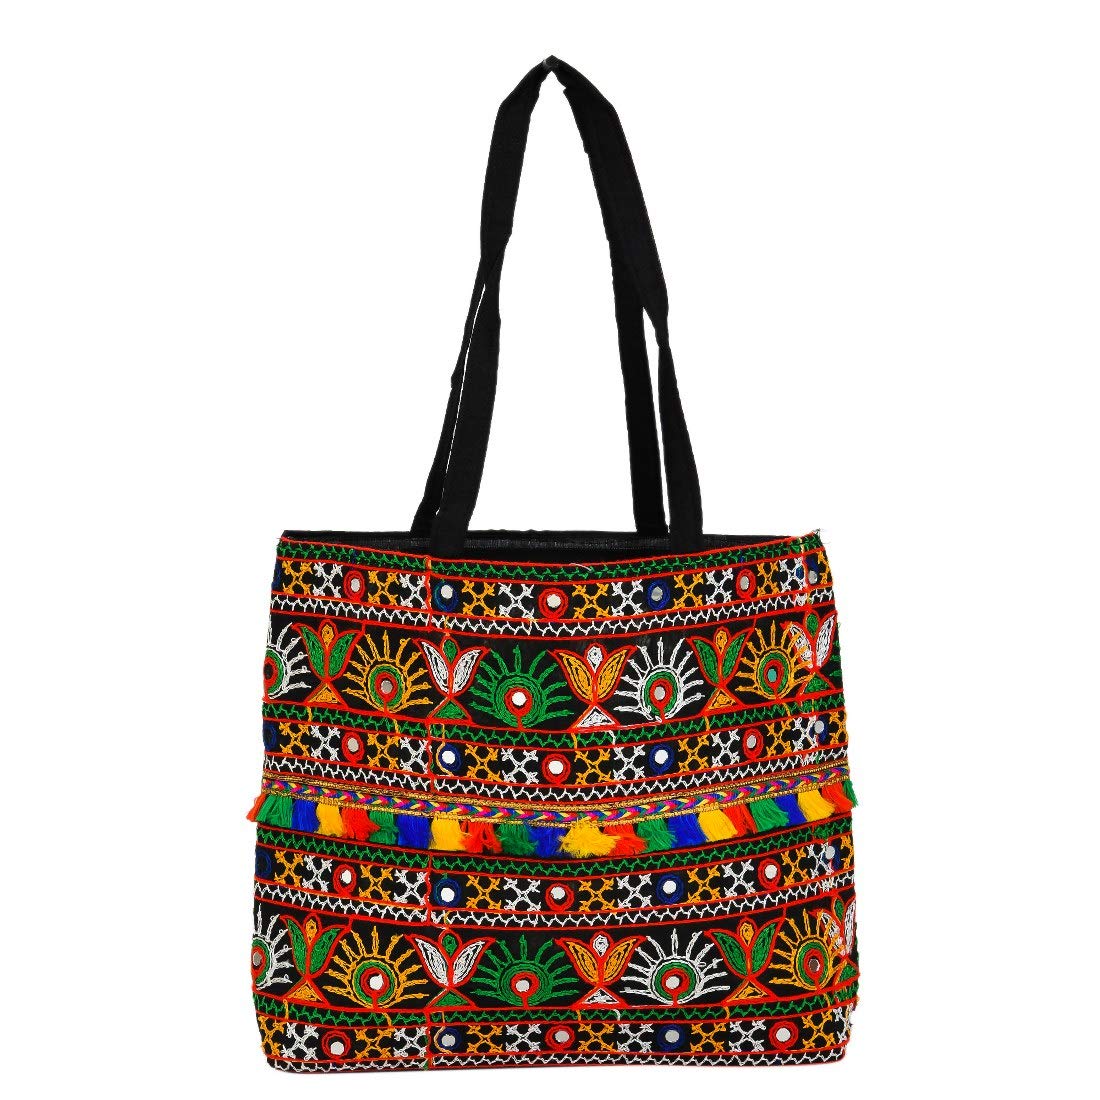 Buy Rajasthani Purse Bag Online In India - Etsy India-bdsngoinhaviet.com.vn